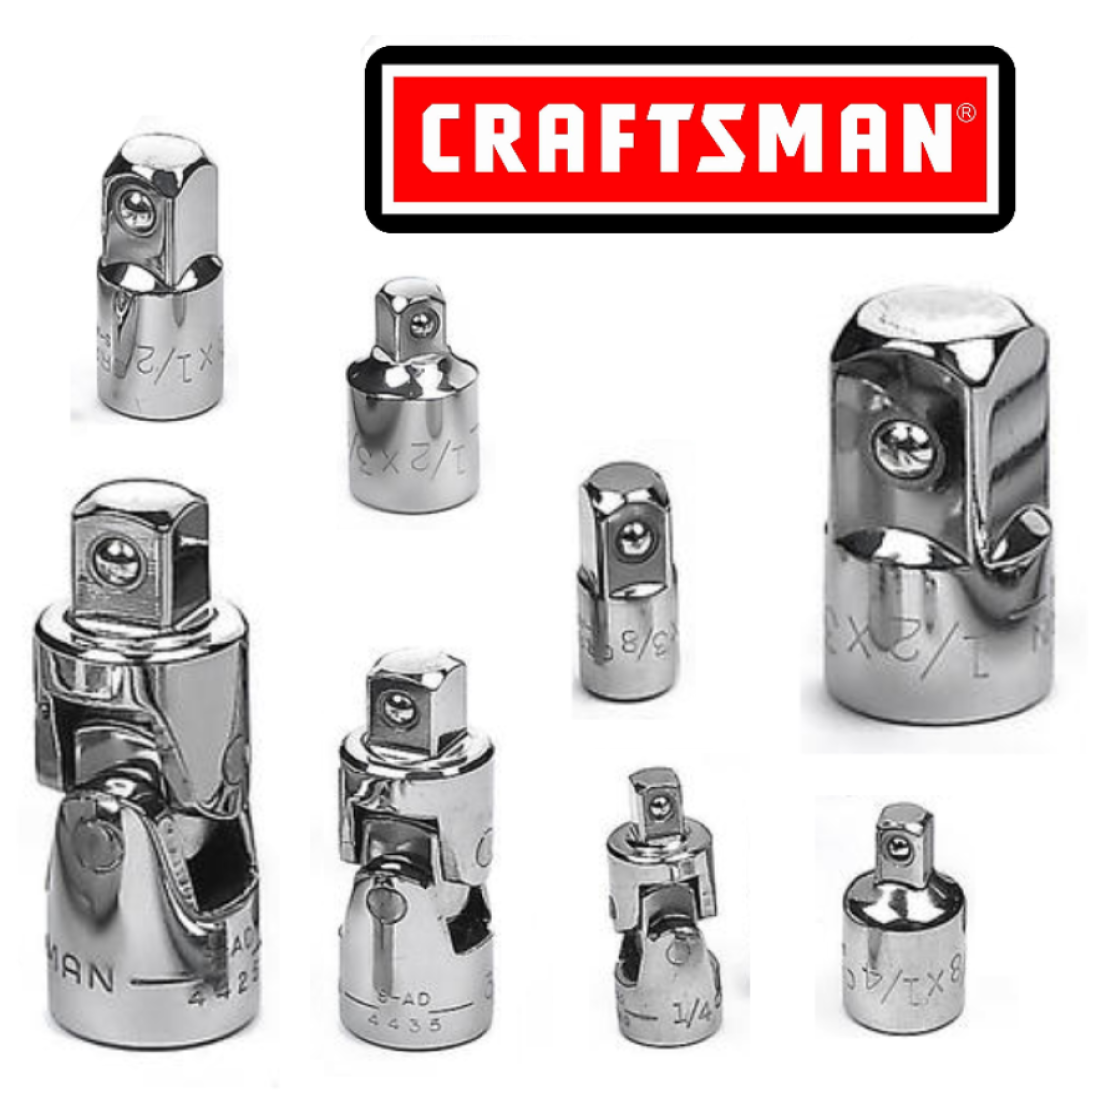 Craftsman Universal Joint (wobble) / Socket Adapter Choose A Size Fast Shipping